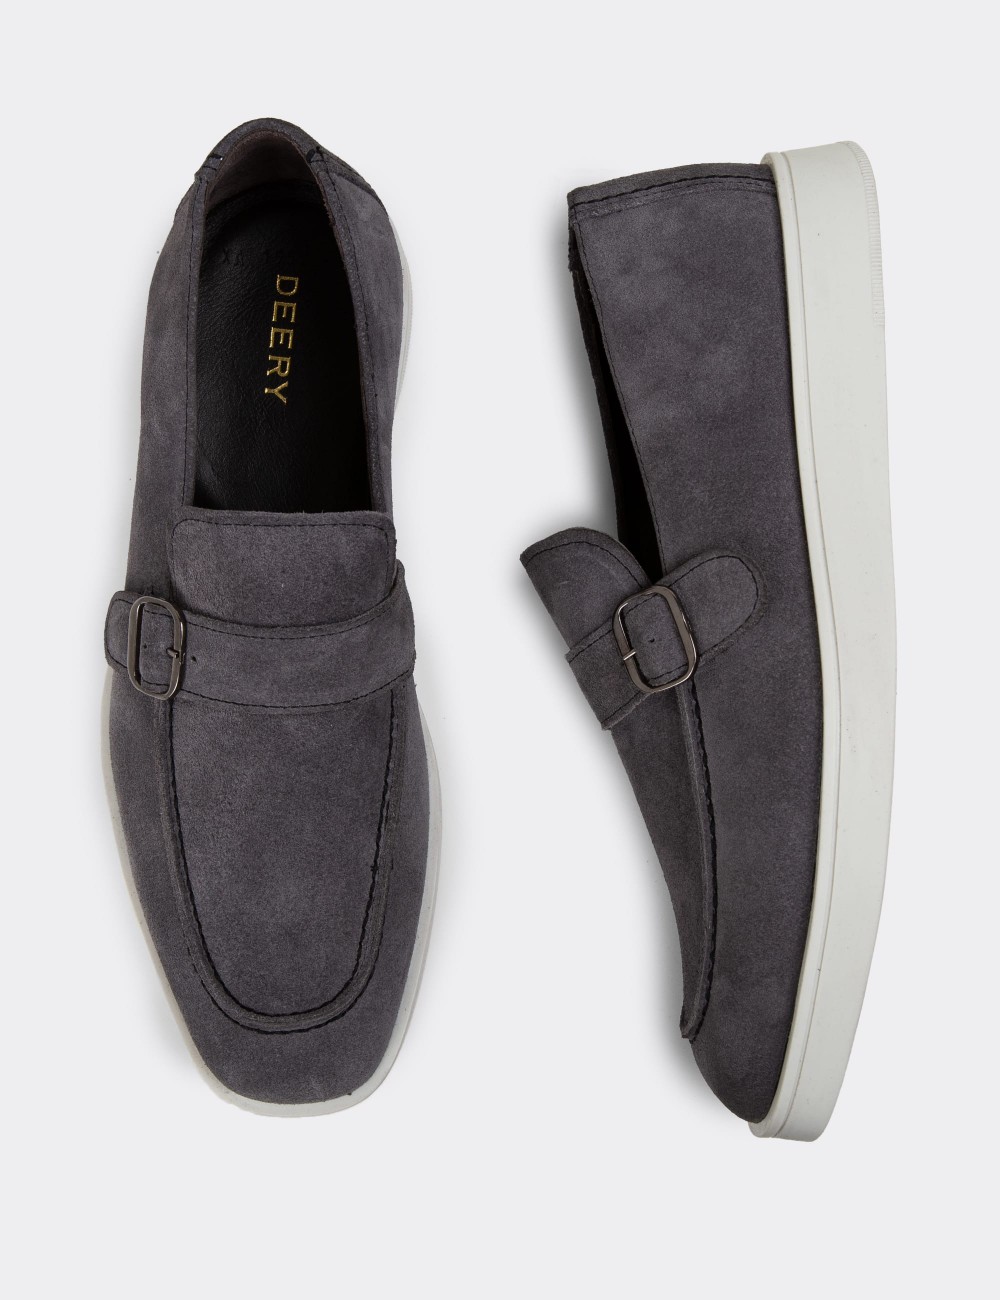 Gray Suede Monk Strap Leather Loafers - 01959MGRIC01